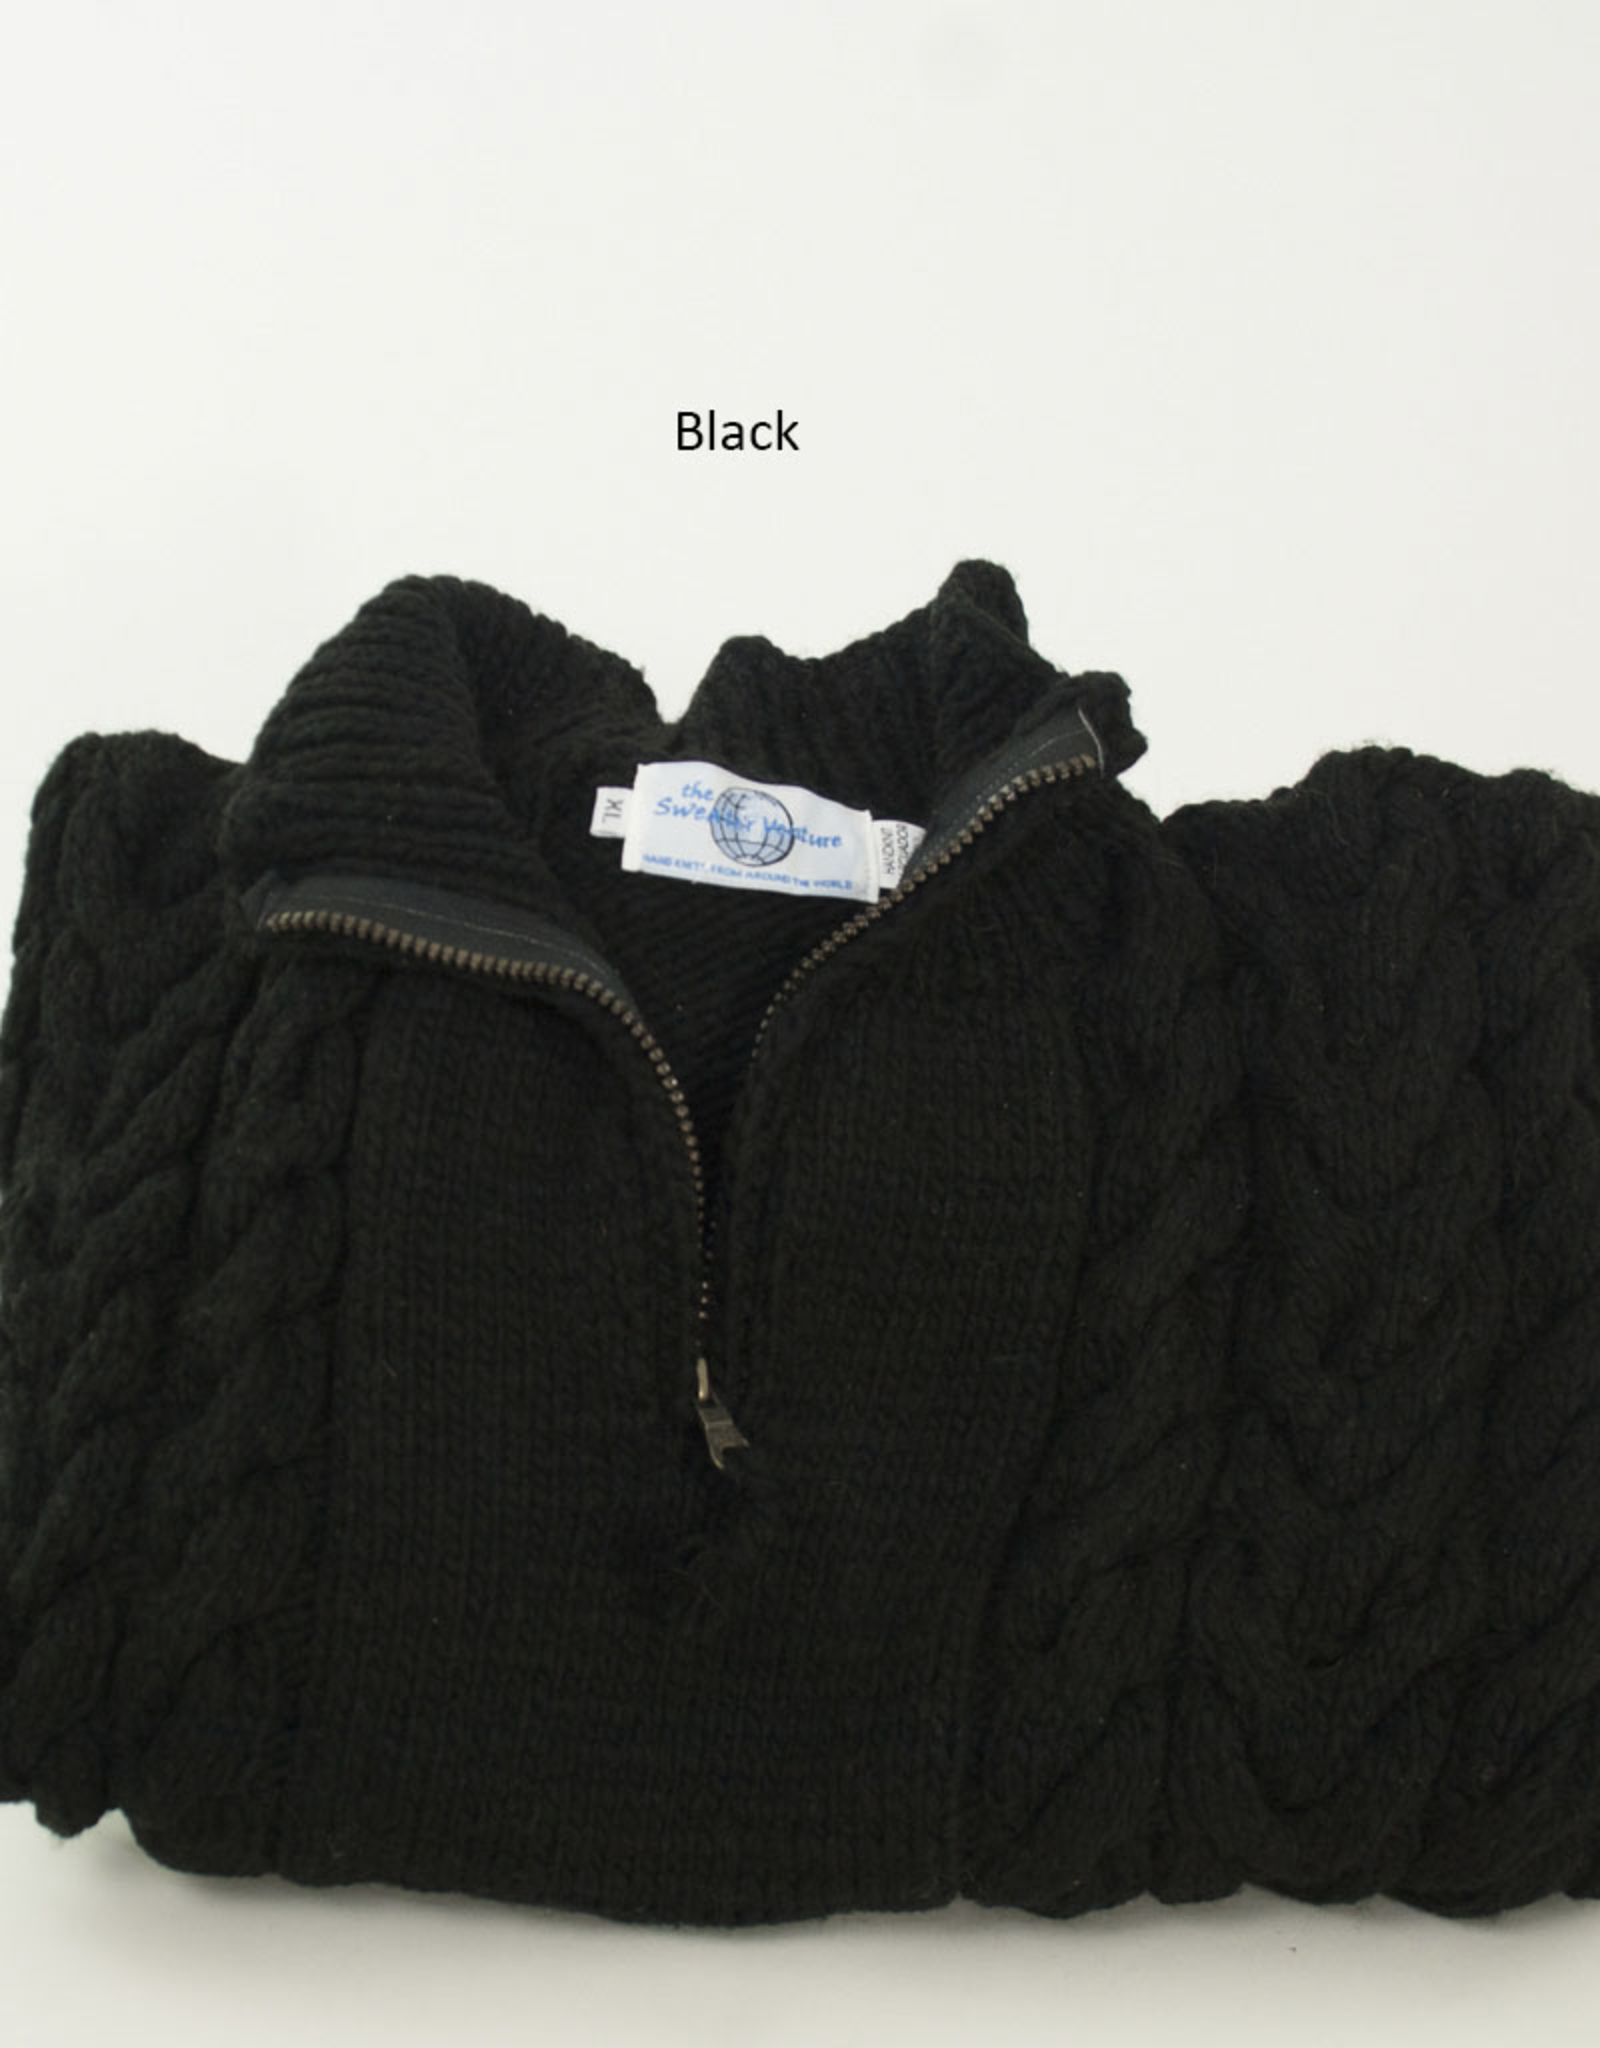 The Sweater Venture Cable 1/4 Zip Highneck